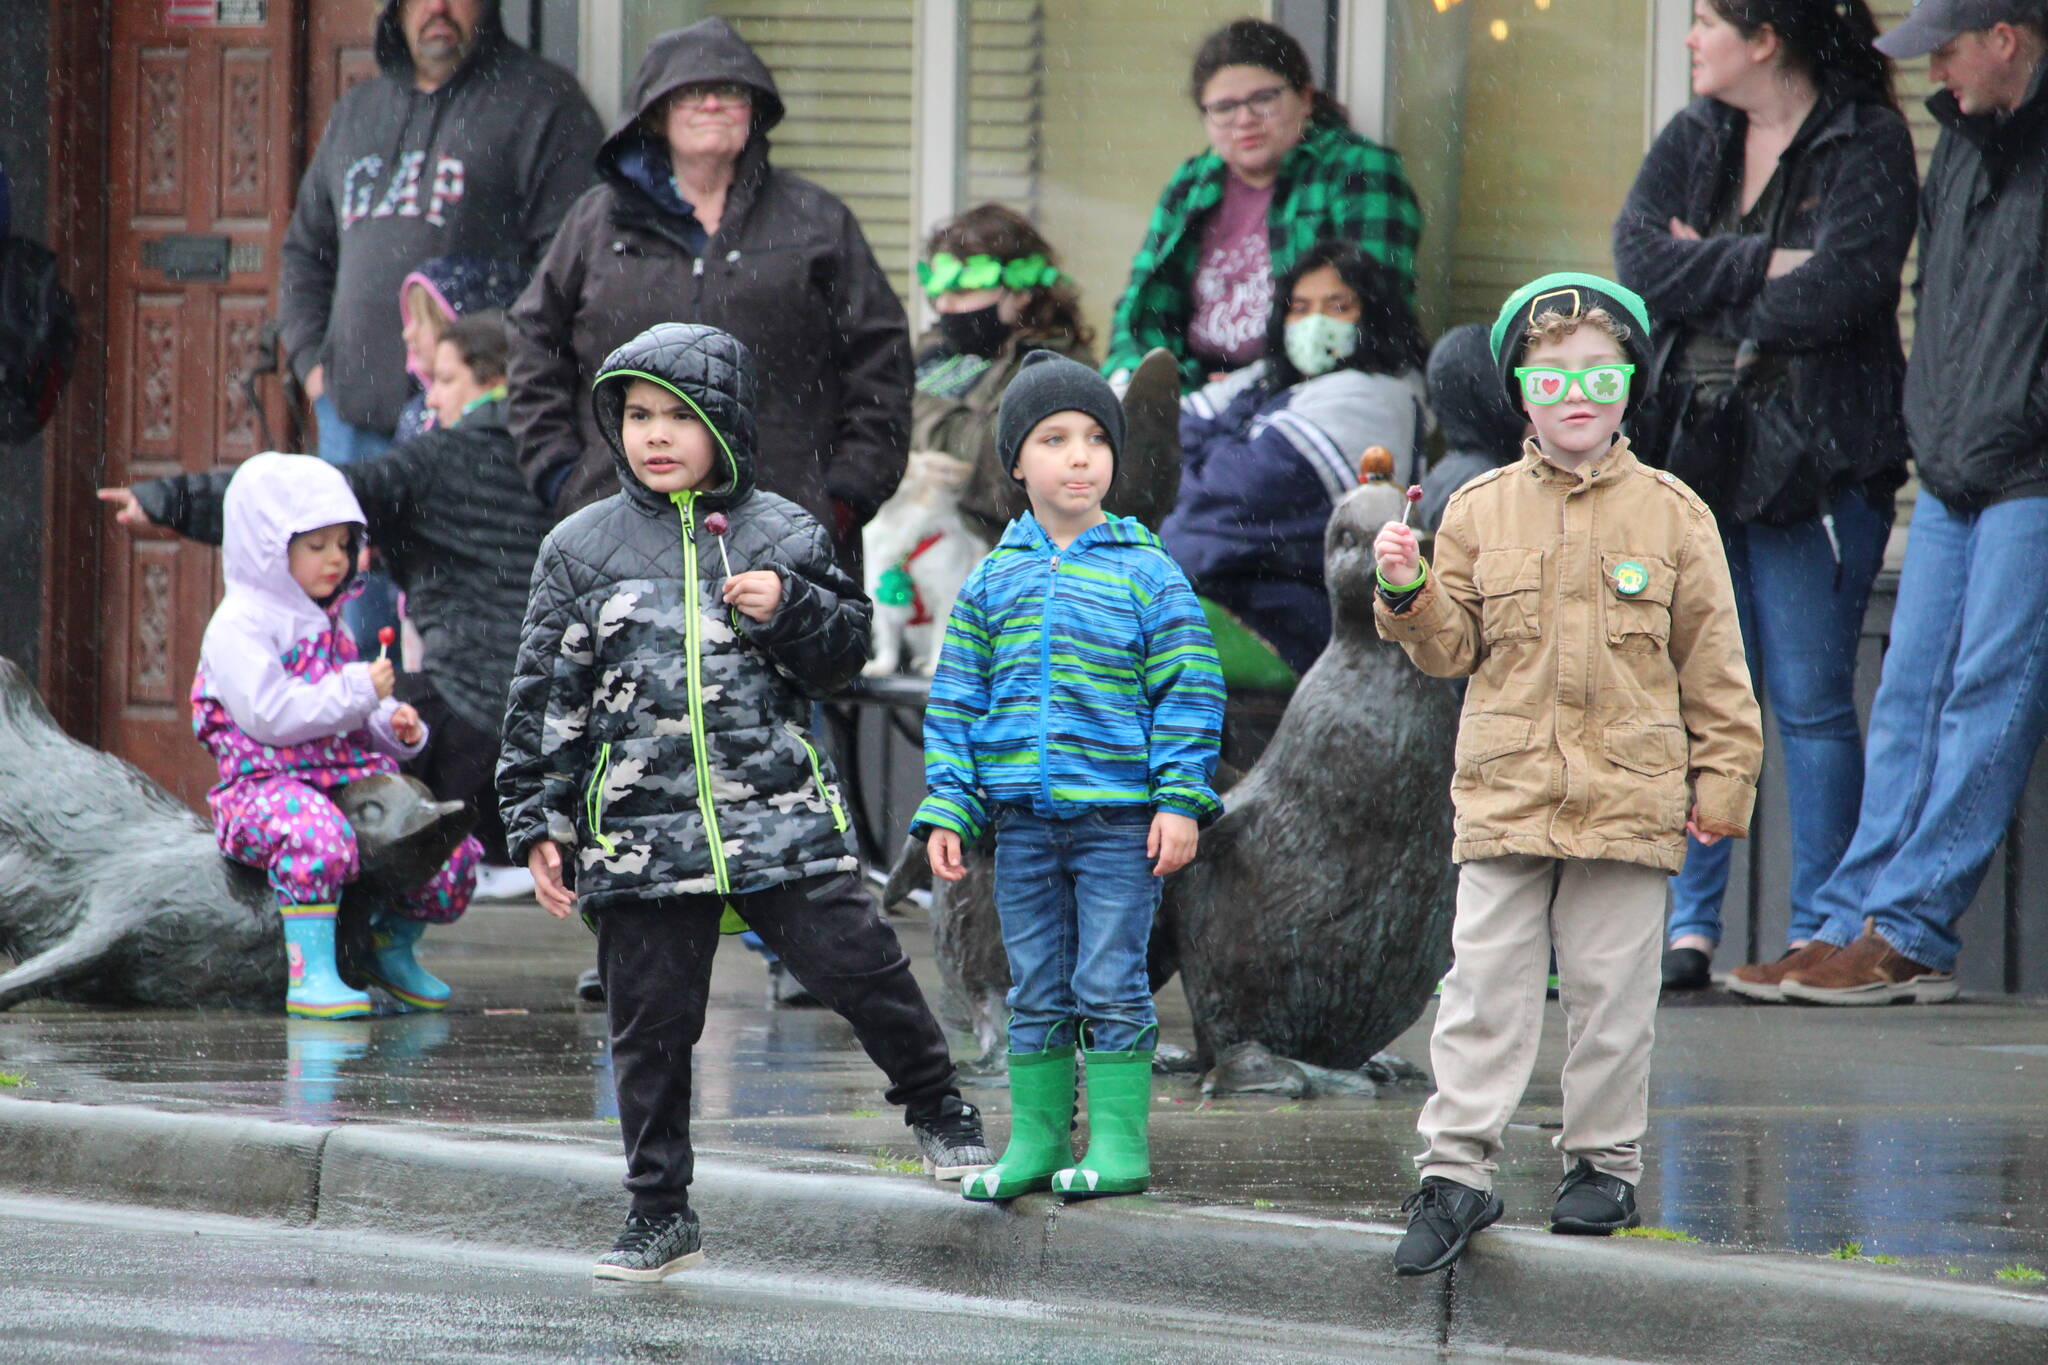 Oak Harbor children brave Thursday’s rain to watch the St. Patrick’s Day parade in the hopes of getting some candy.